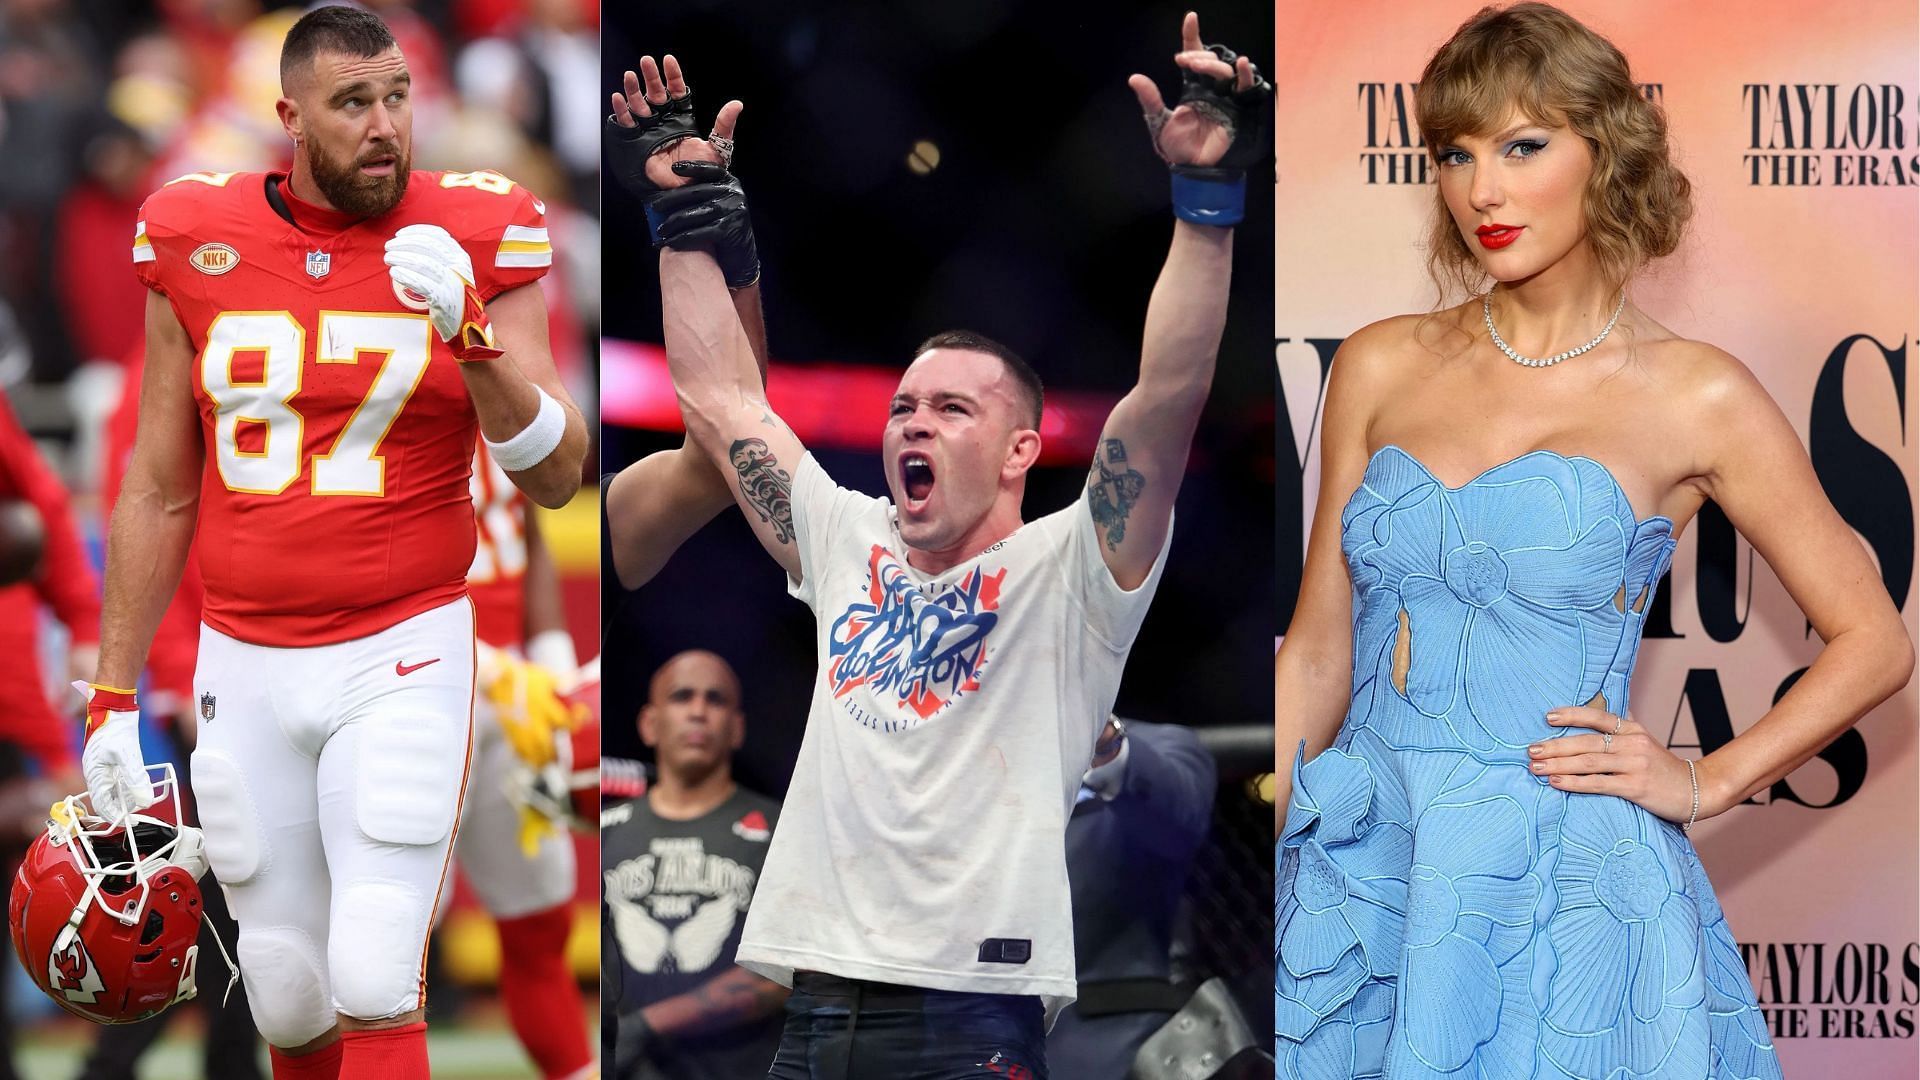 Travis Kelce, Colby Covington, and Taylor Swift